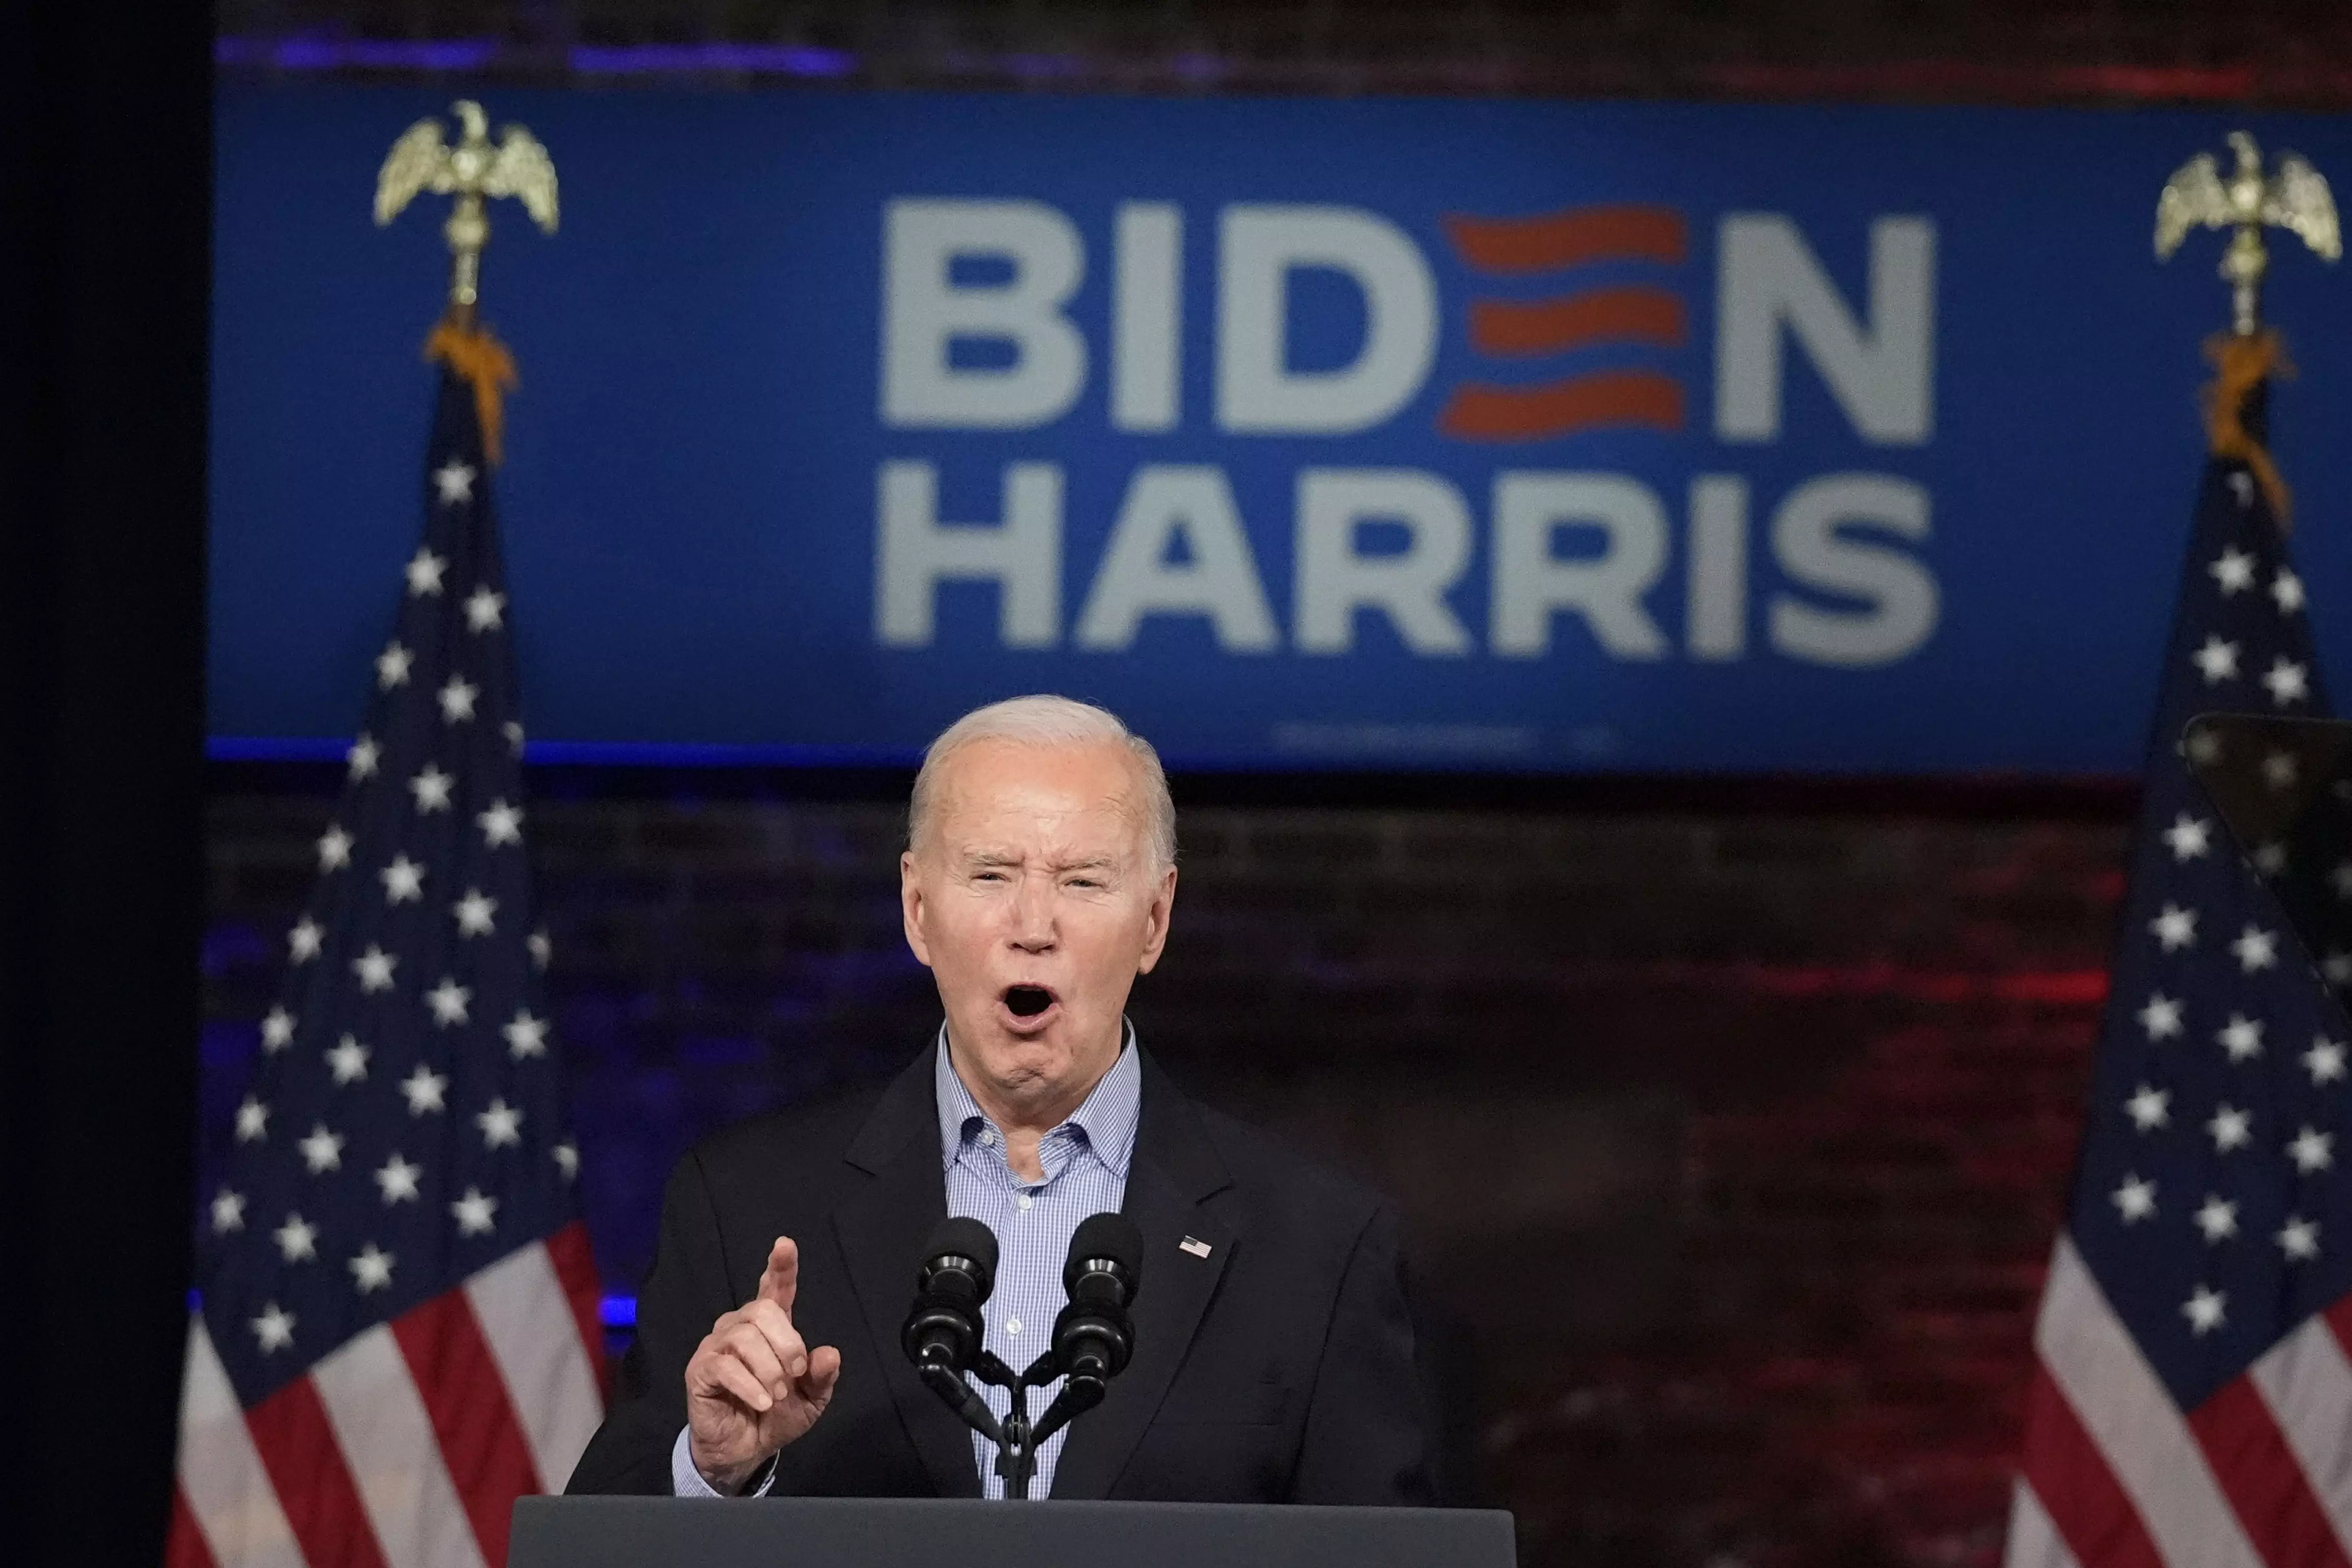 Biden-Trump rematch as they clinch presidential nominations